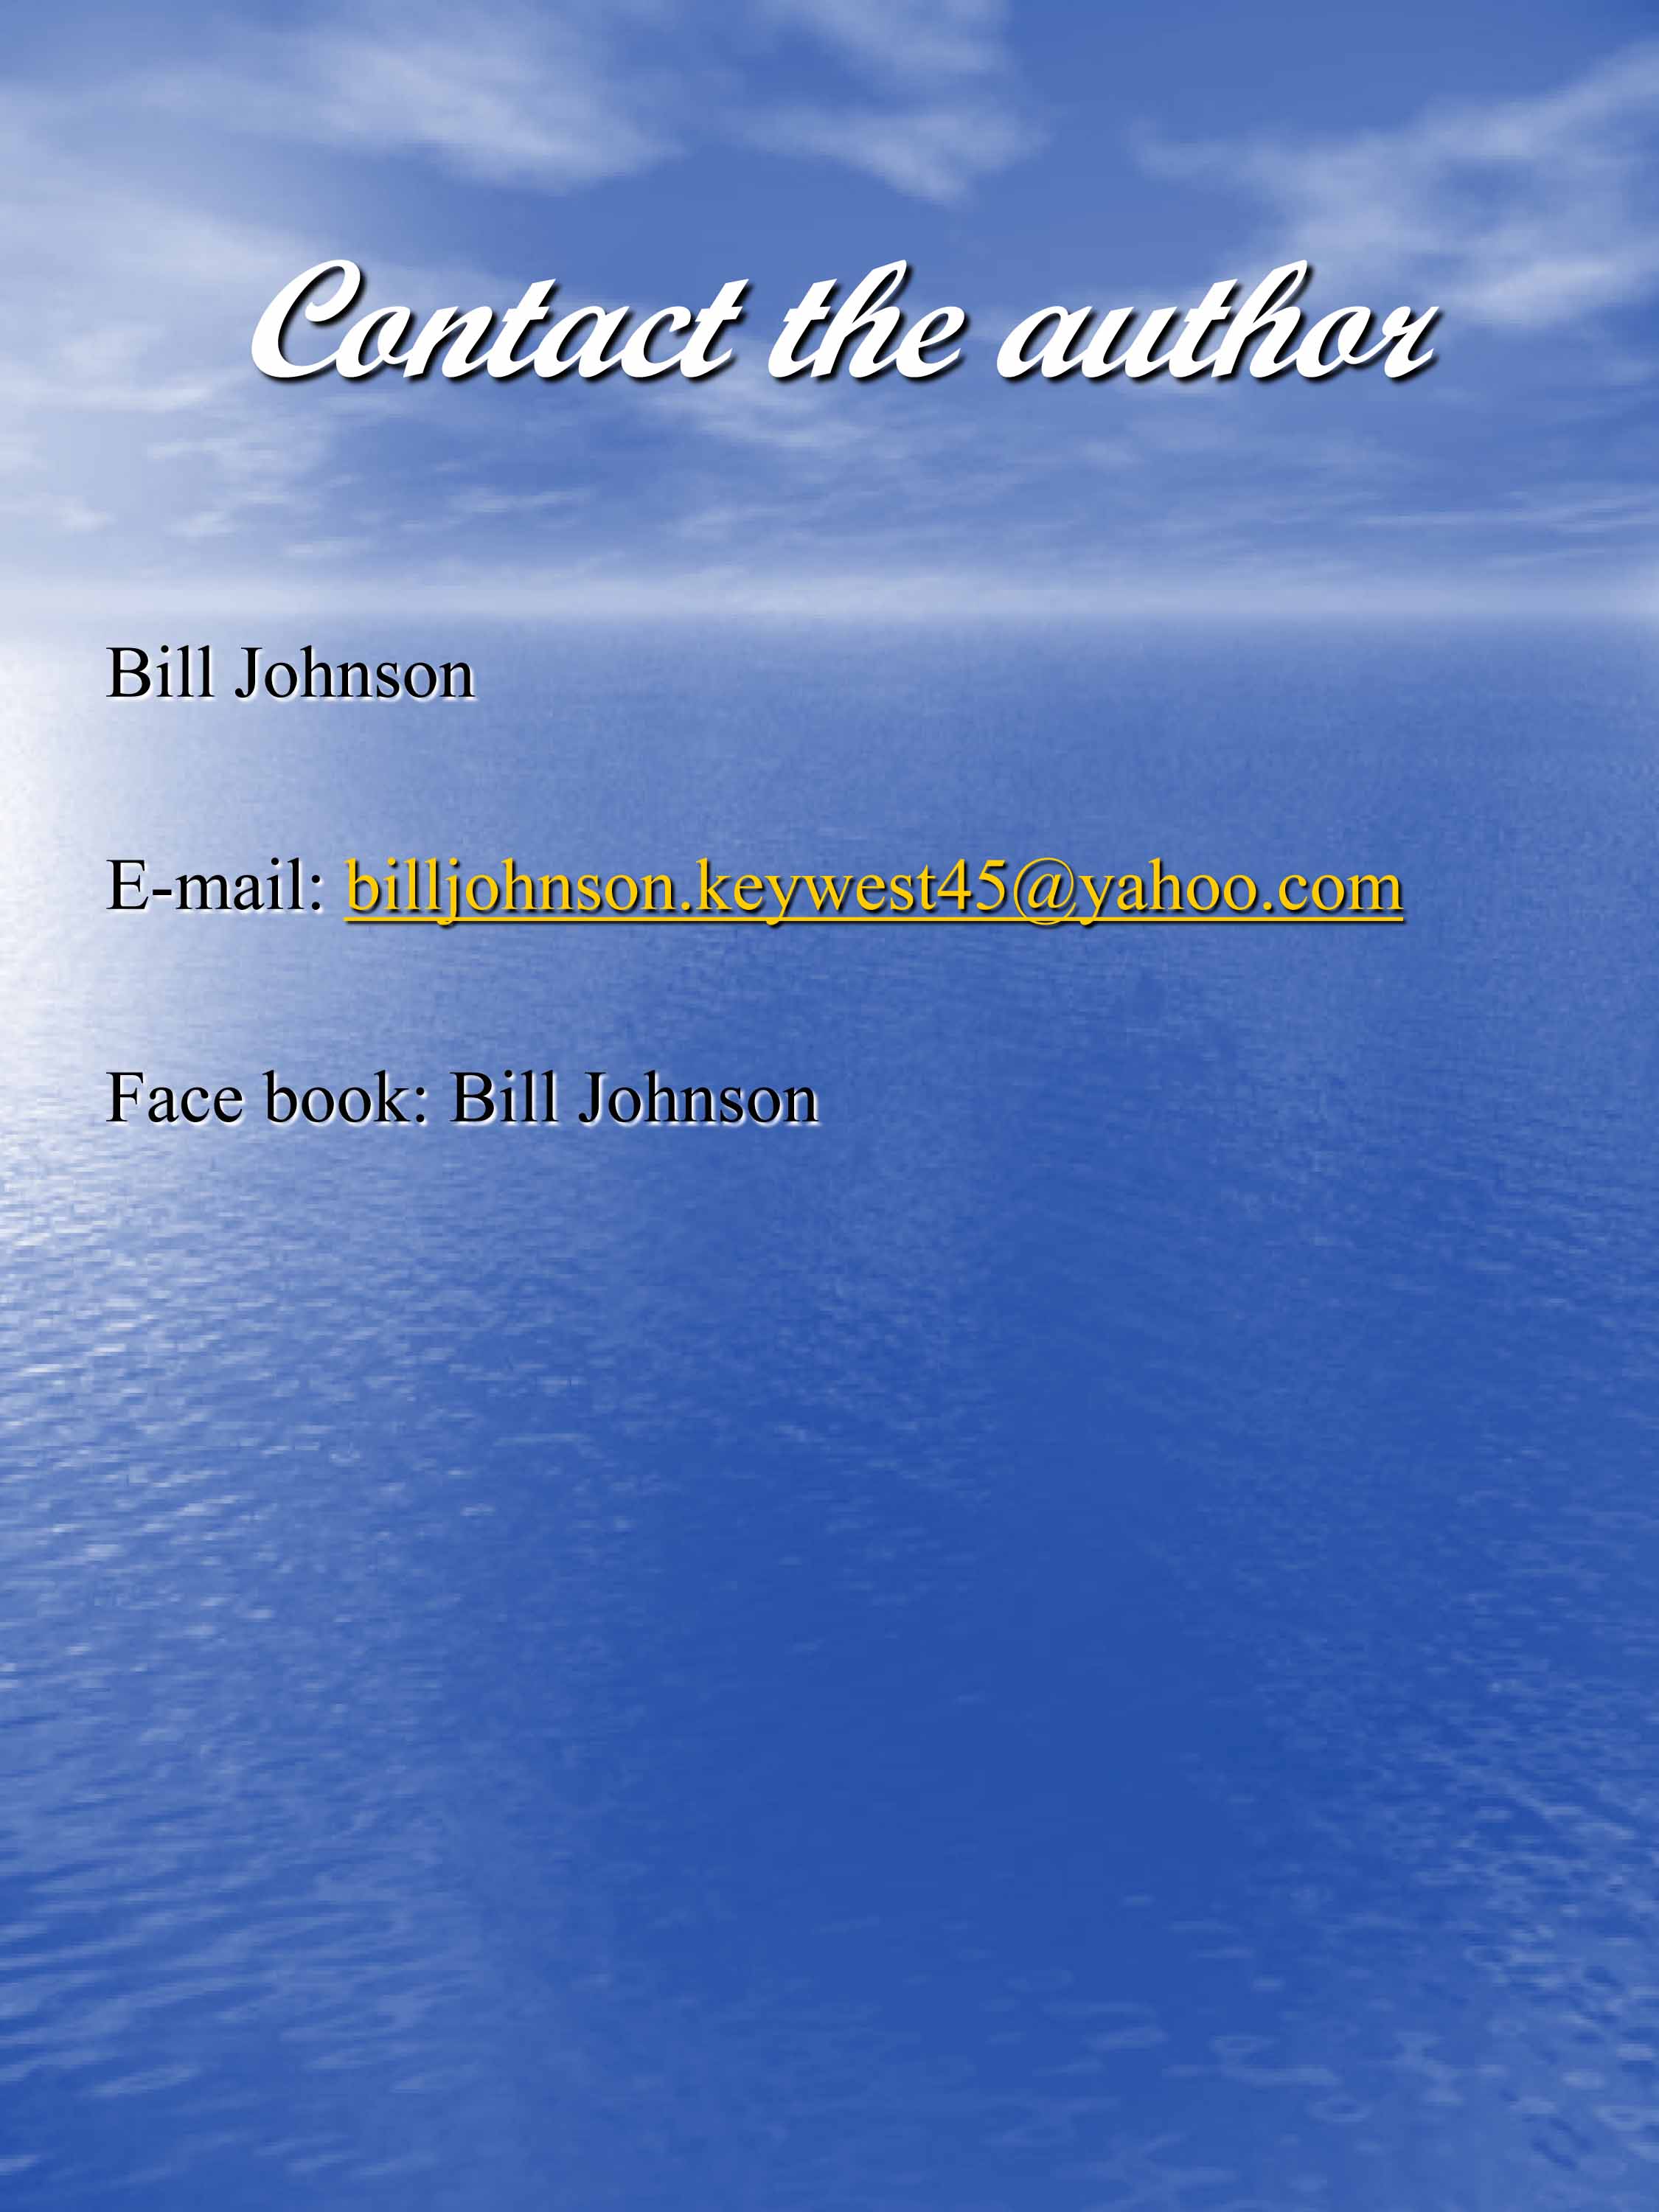 11 Contact the Author